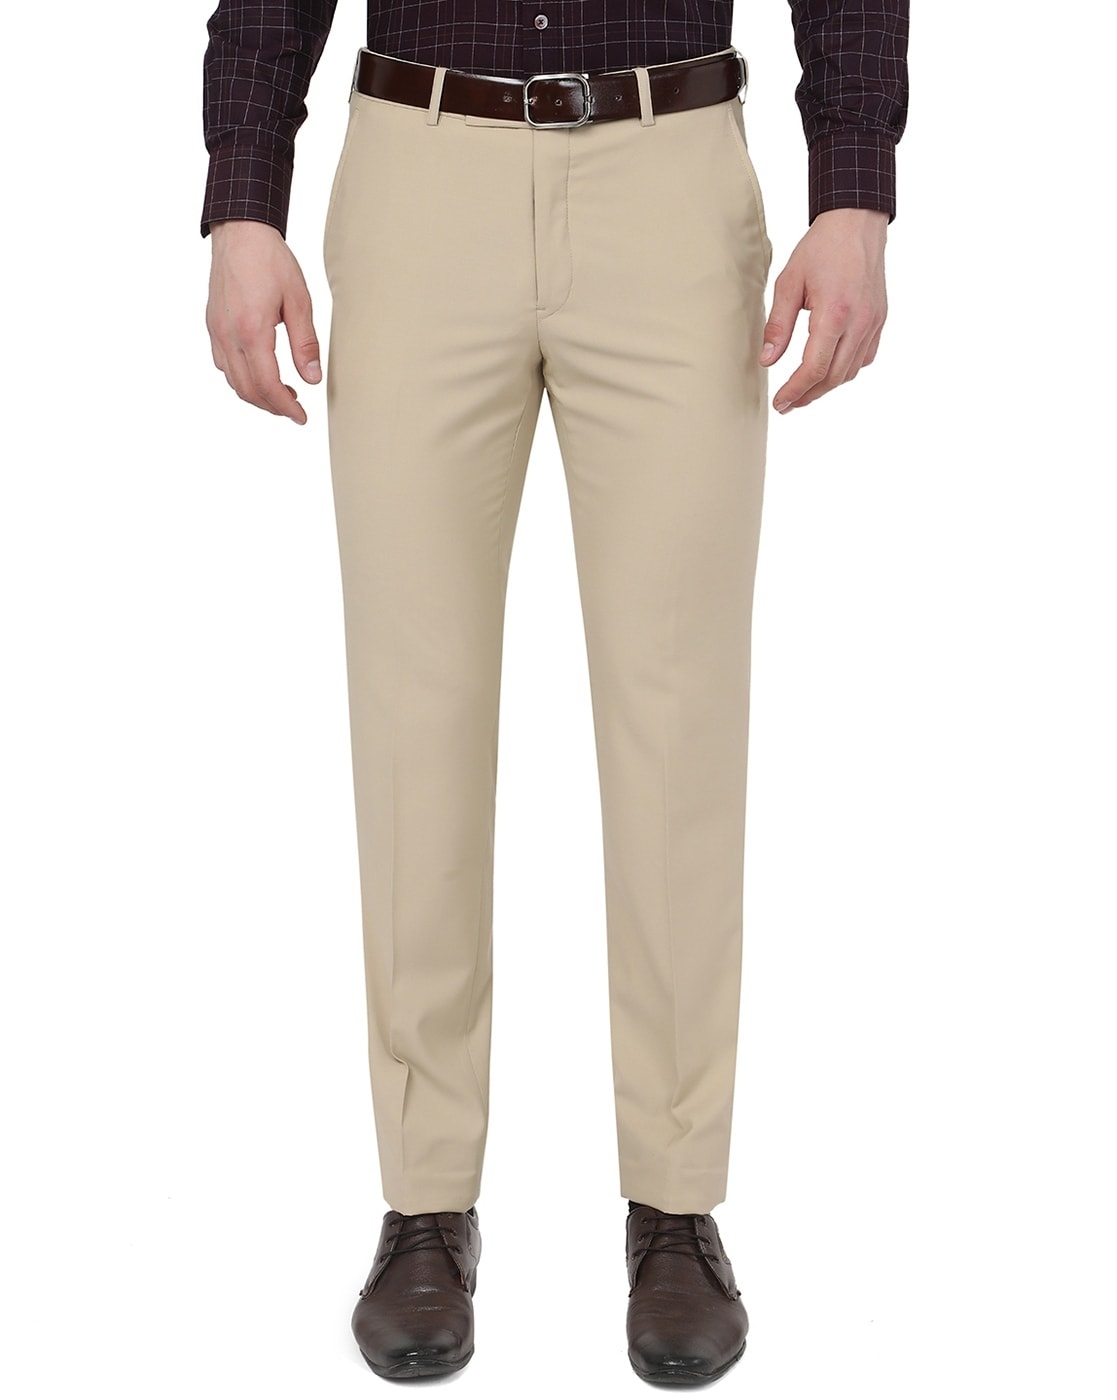 Buy Navy Trousers & Pants for Men by tQs Online | Ajio.com